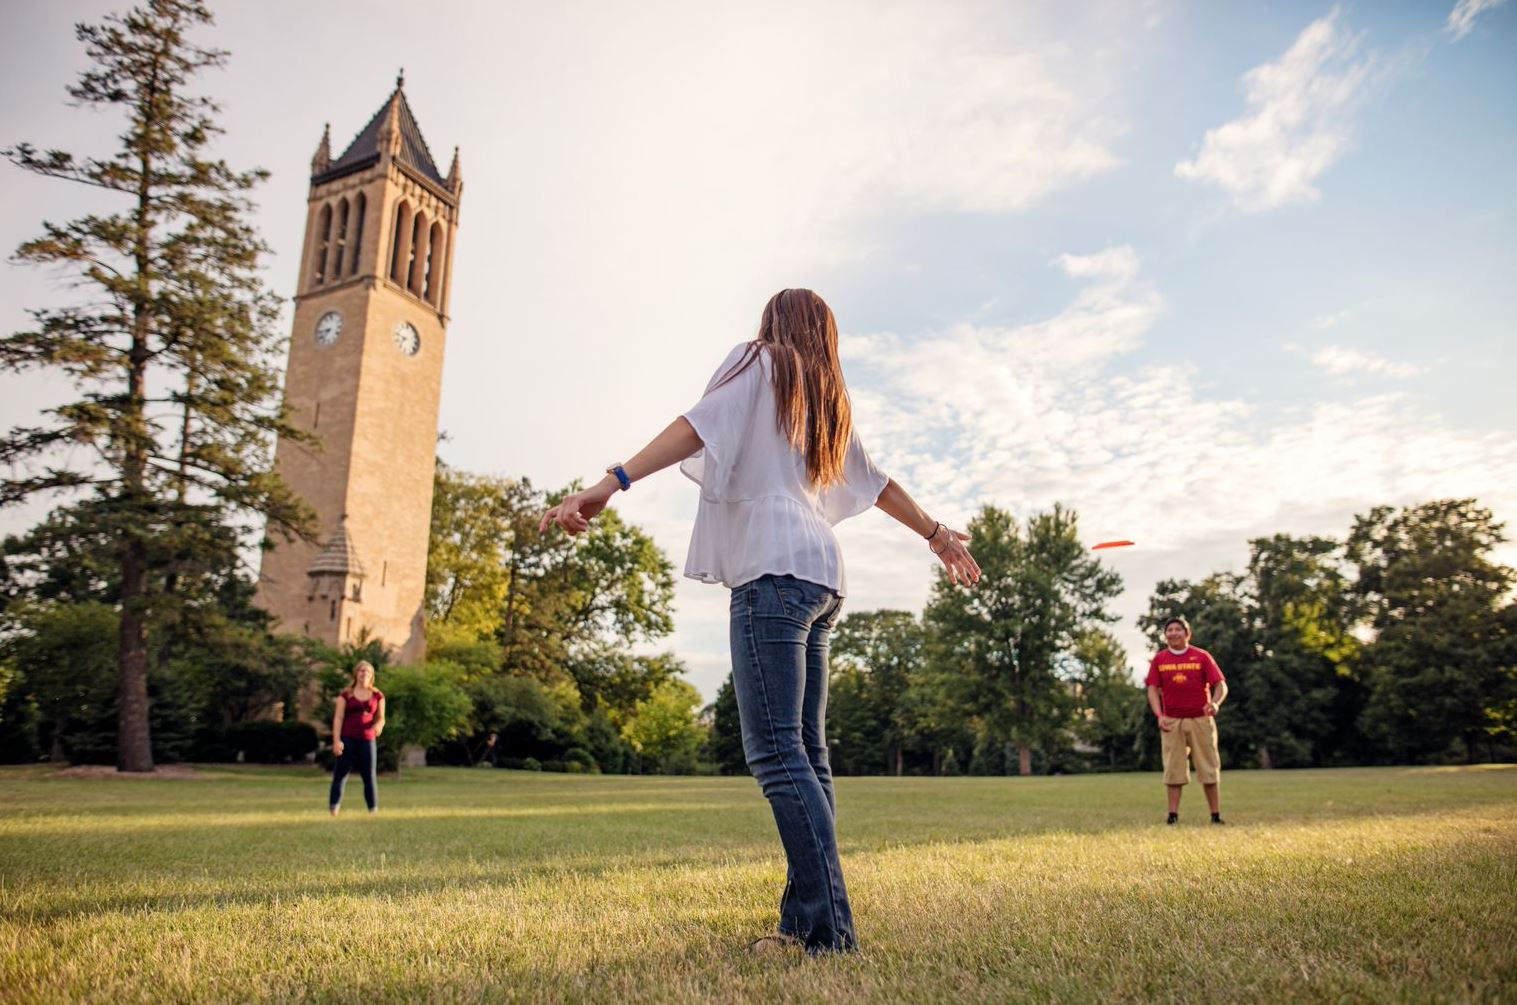 Focus on one student, facing away from the camera, throwing a frisbee to two friends in front of the campanile 